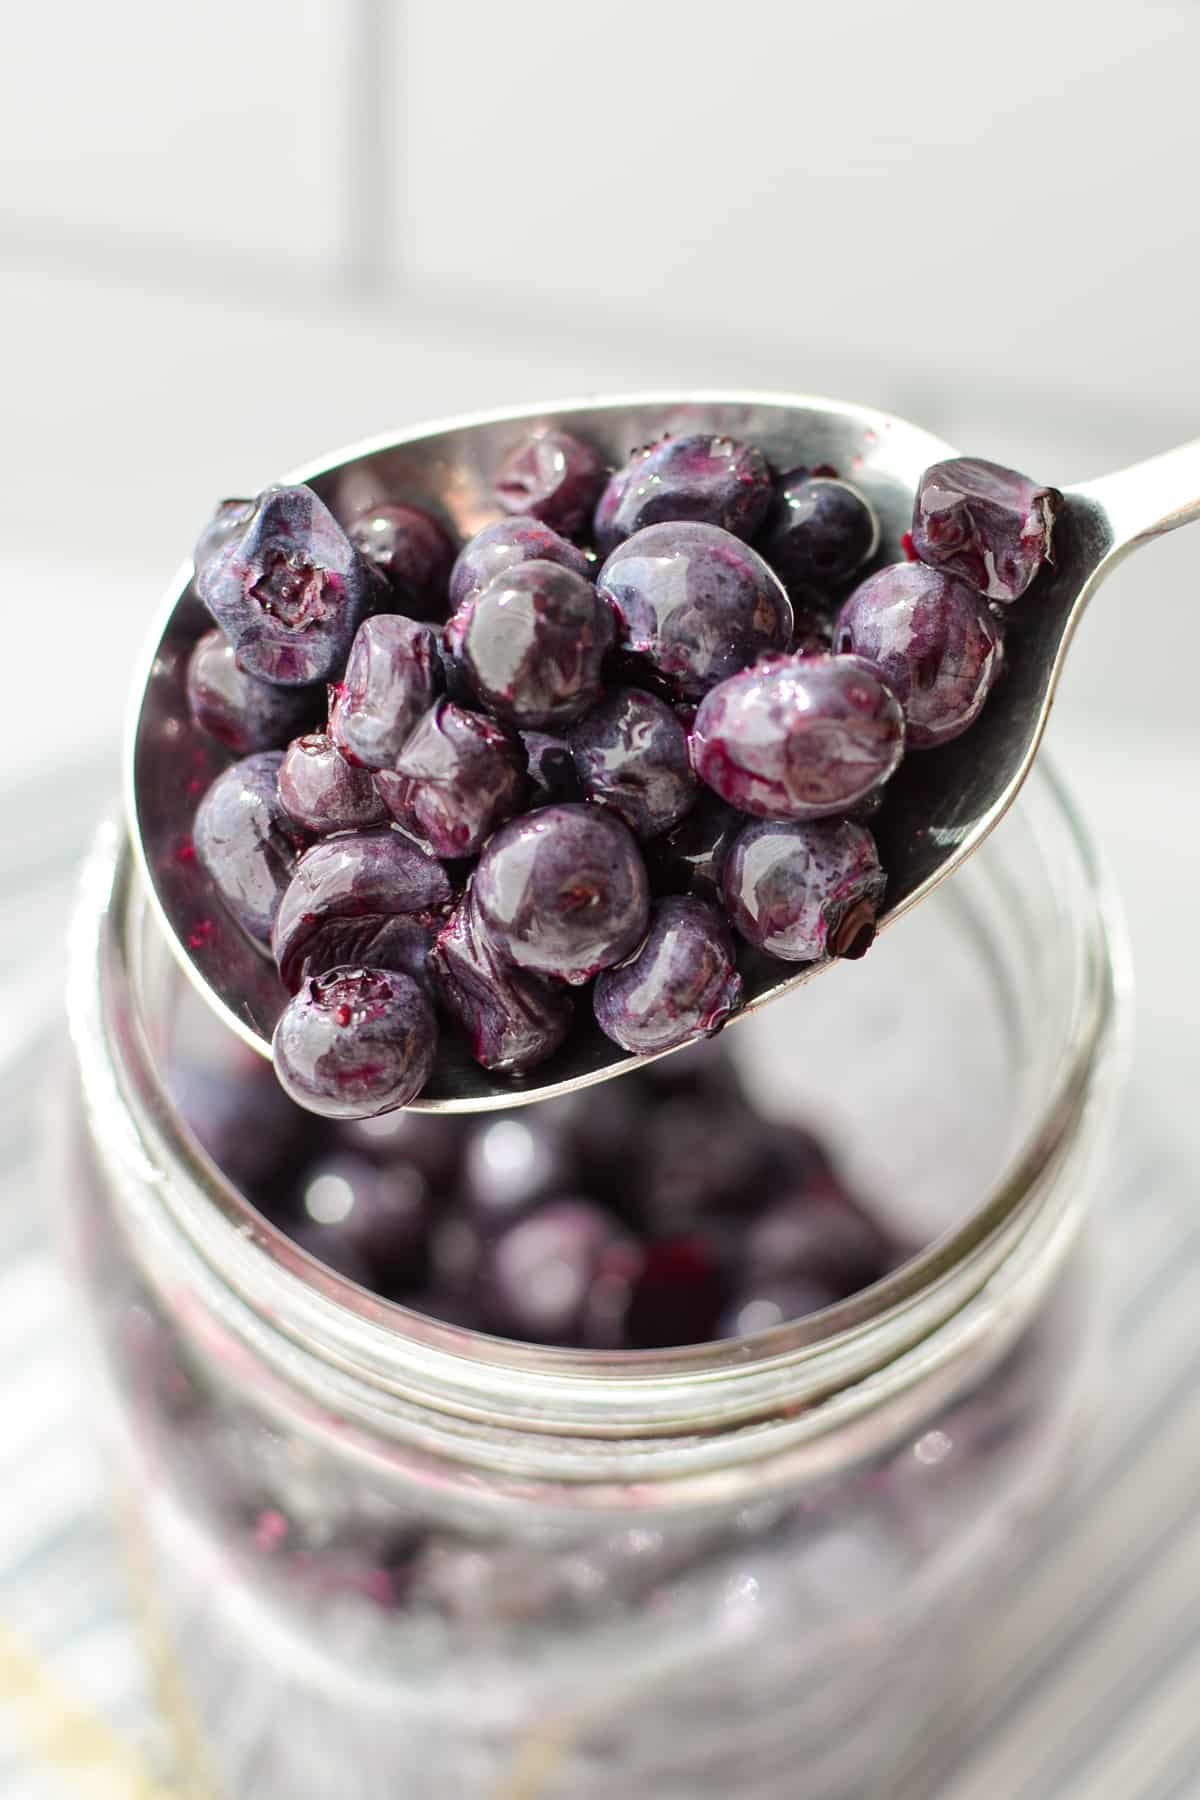 A spoonful of blueberries from a jar.